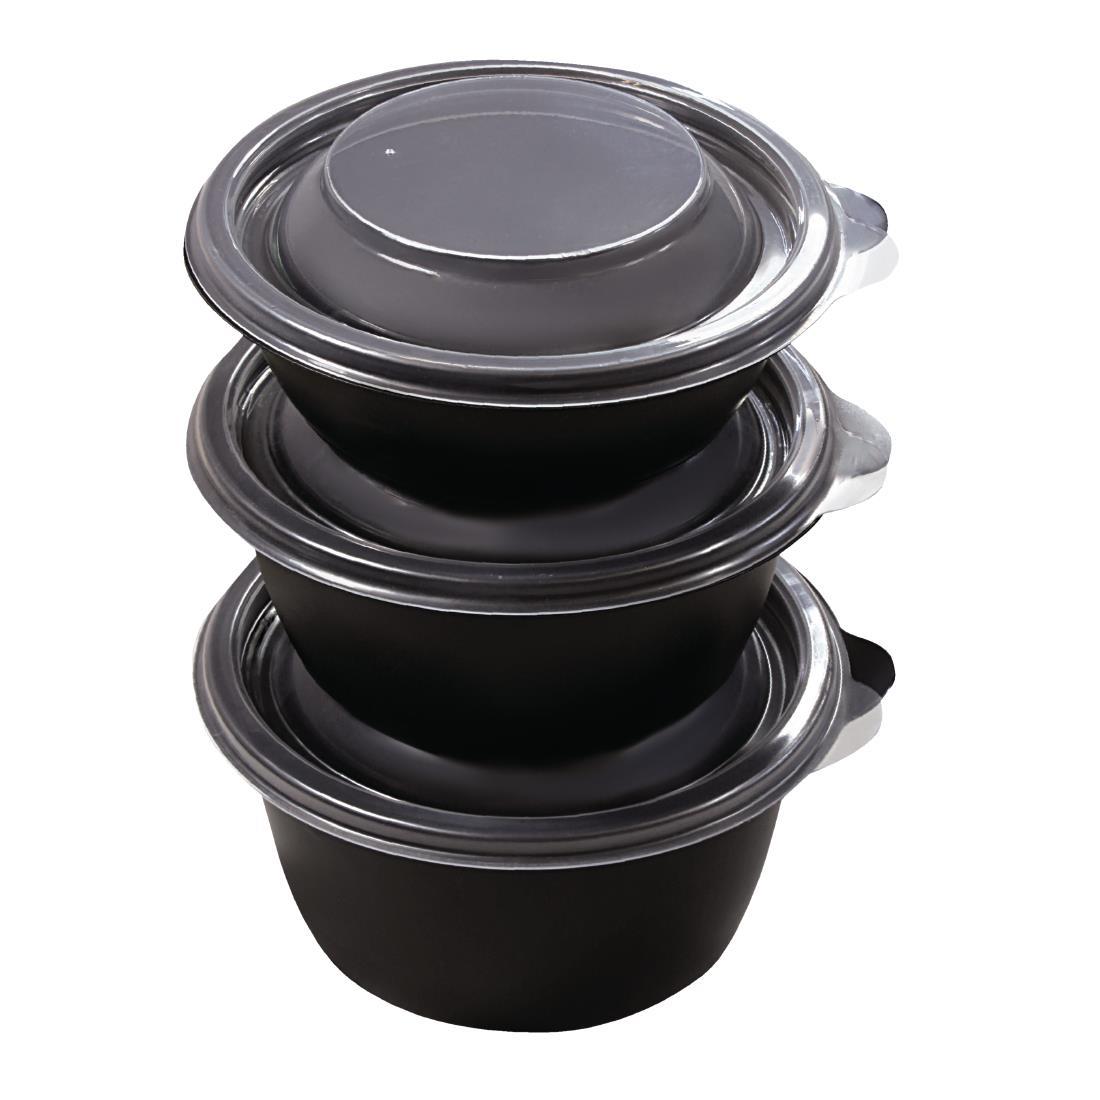 Fastpac Large Round Food Containers 1000ml / 35oz - CY048  - 3